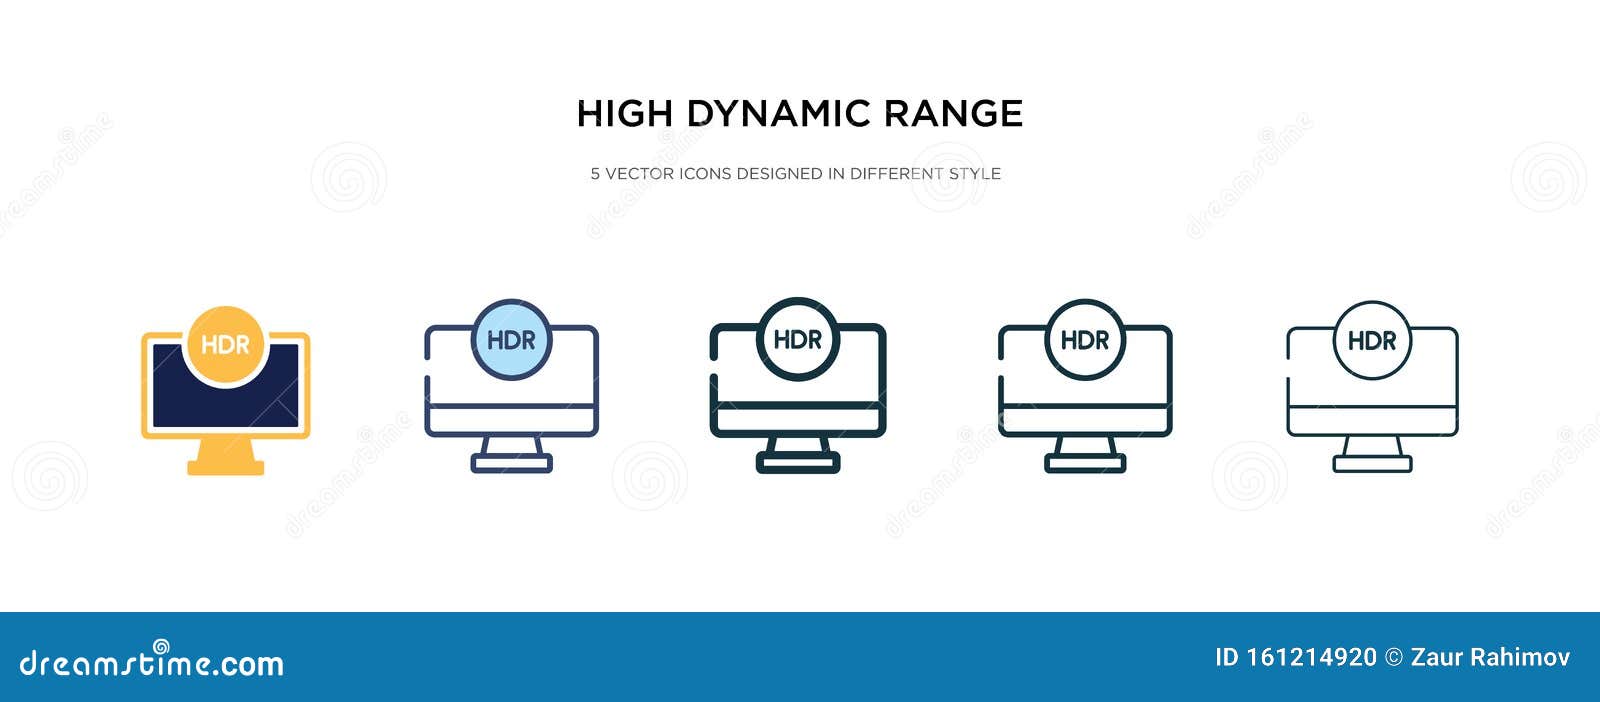 high dynamic range imaging icon in different style  . two colored and black high dynamic range imaging 